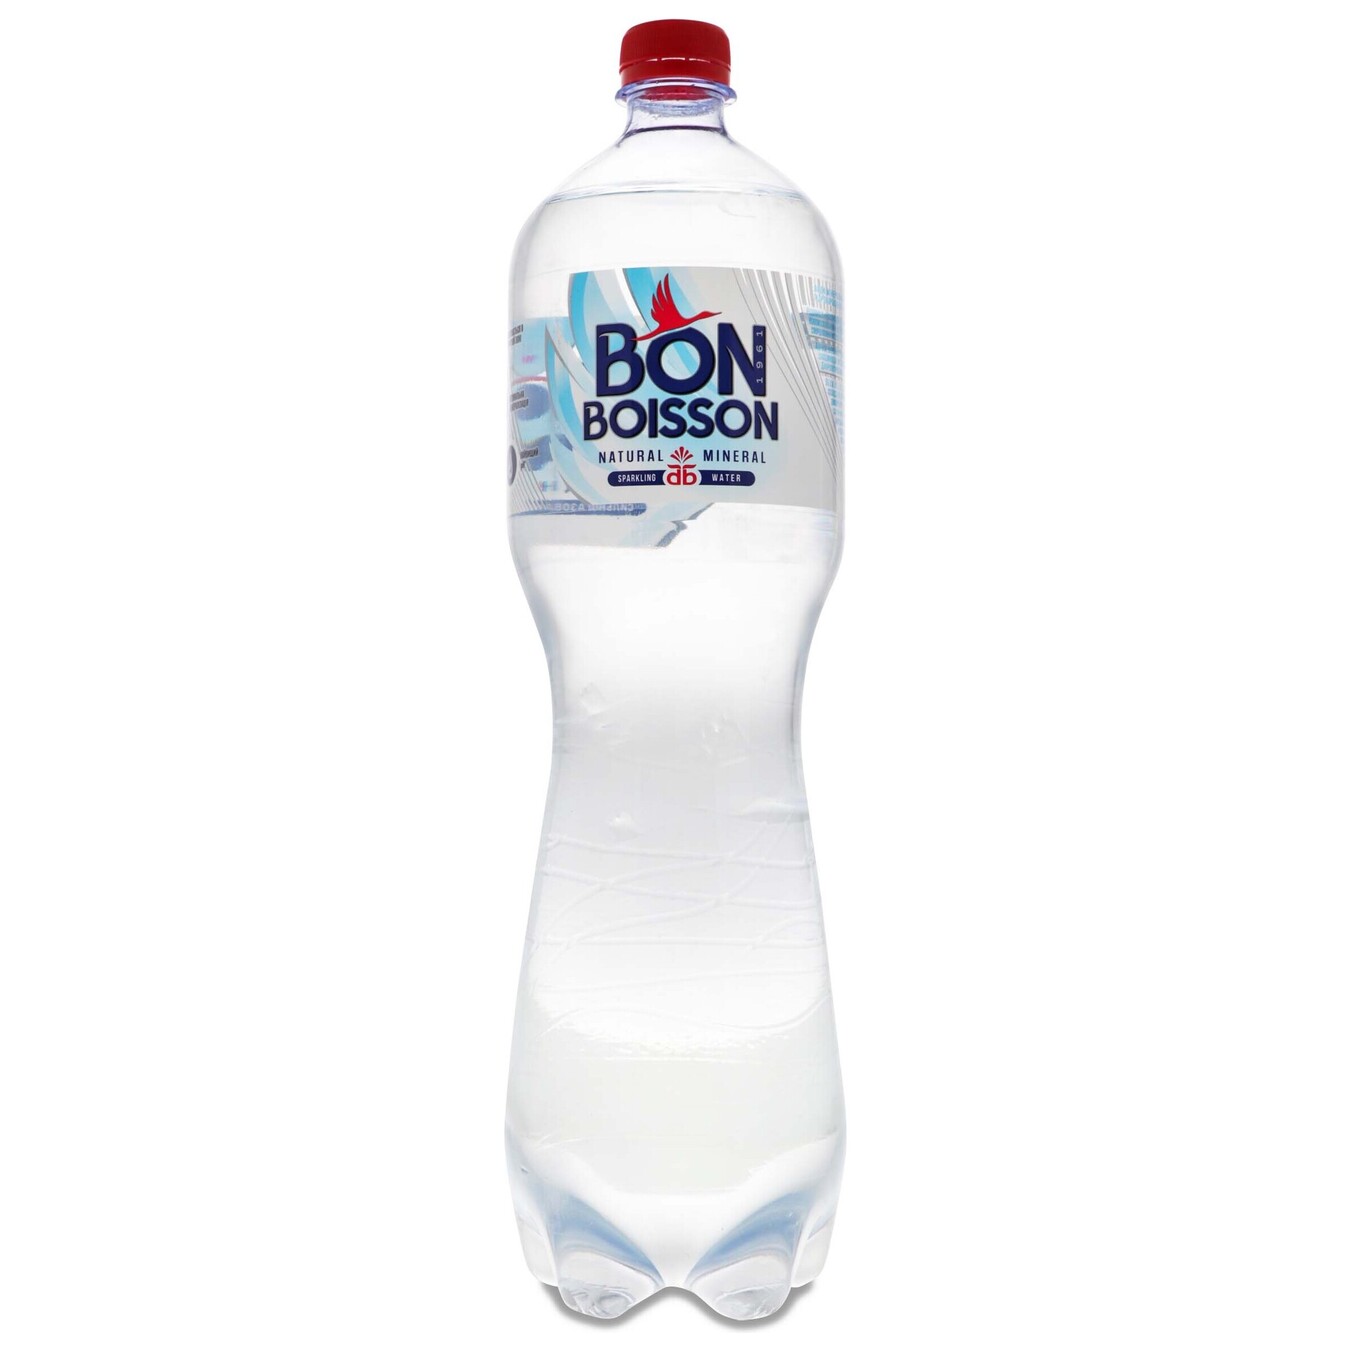 Bon Boisson strongly carbonated mineral water 1.5 l